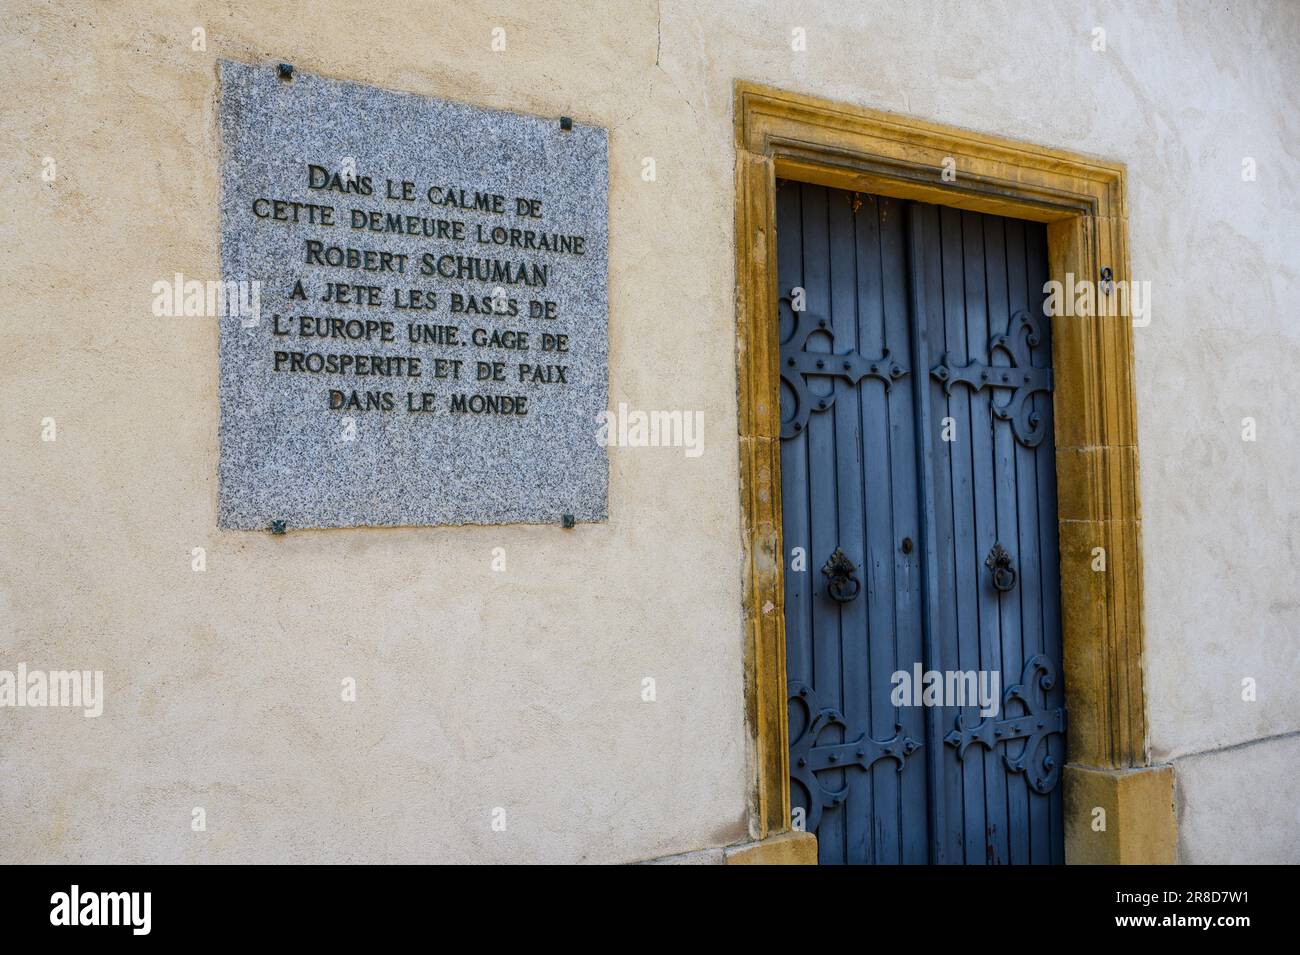 A commemorative tablet on the house where Robert Schuman, the Father of Europe, lived. Stock Photo